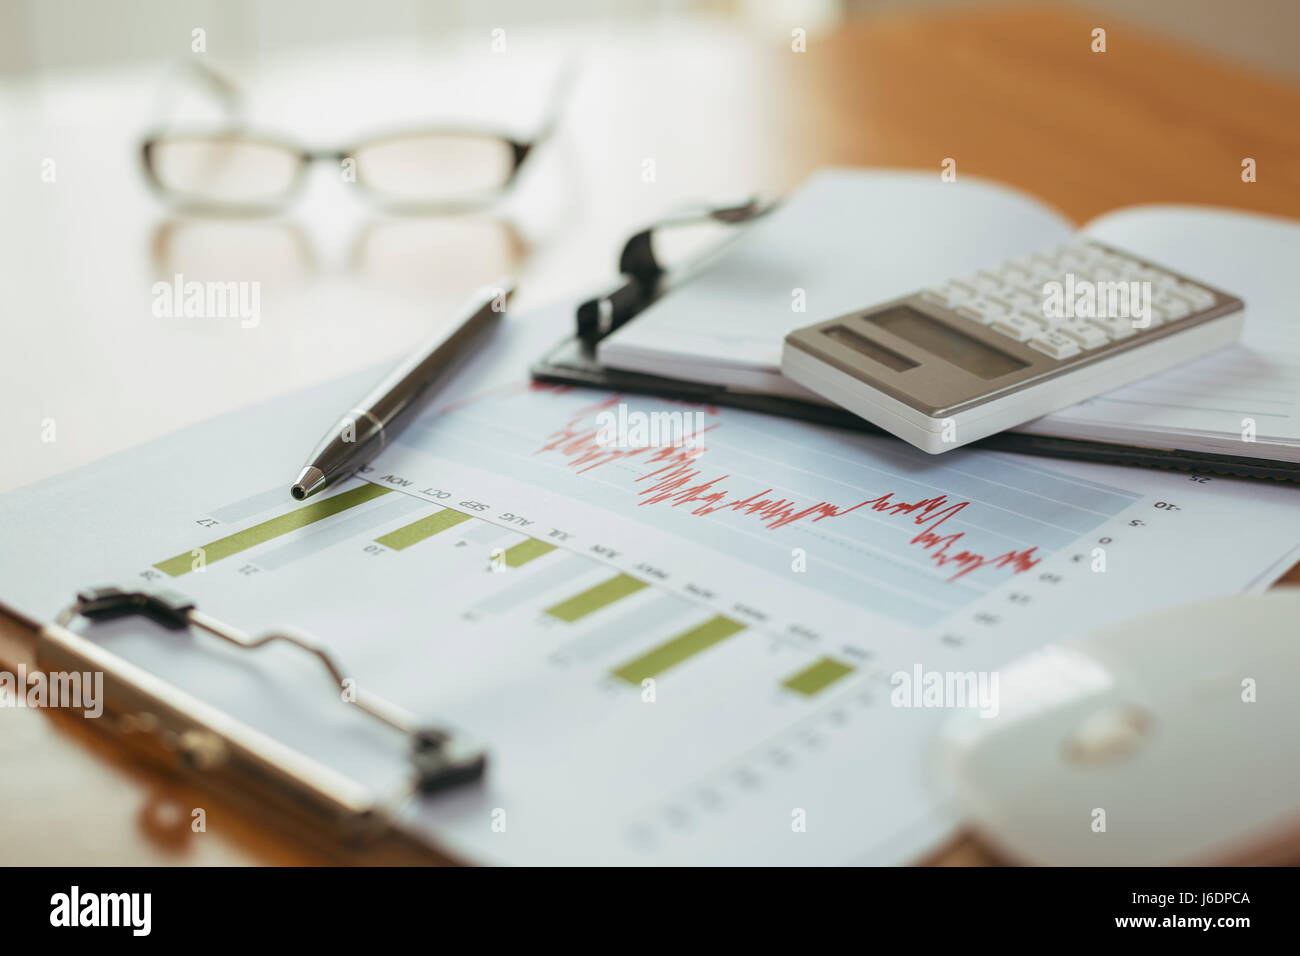 preparation of office desk with office supplies, analysis chart and glasses Stock Photo